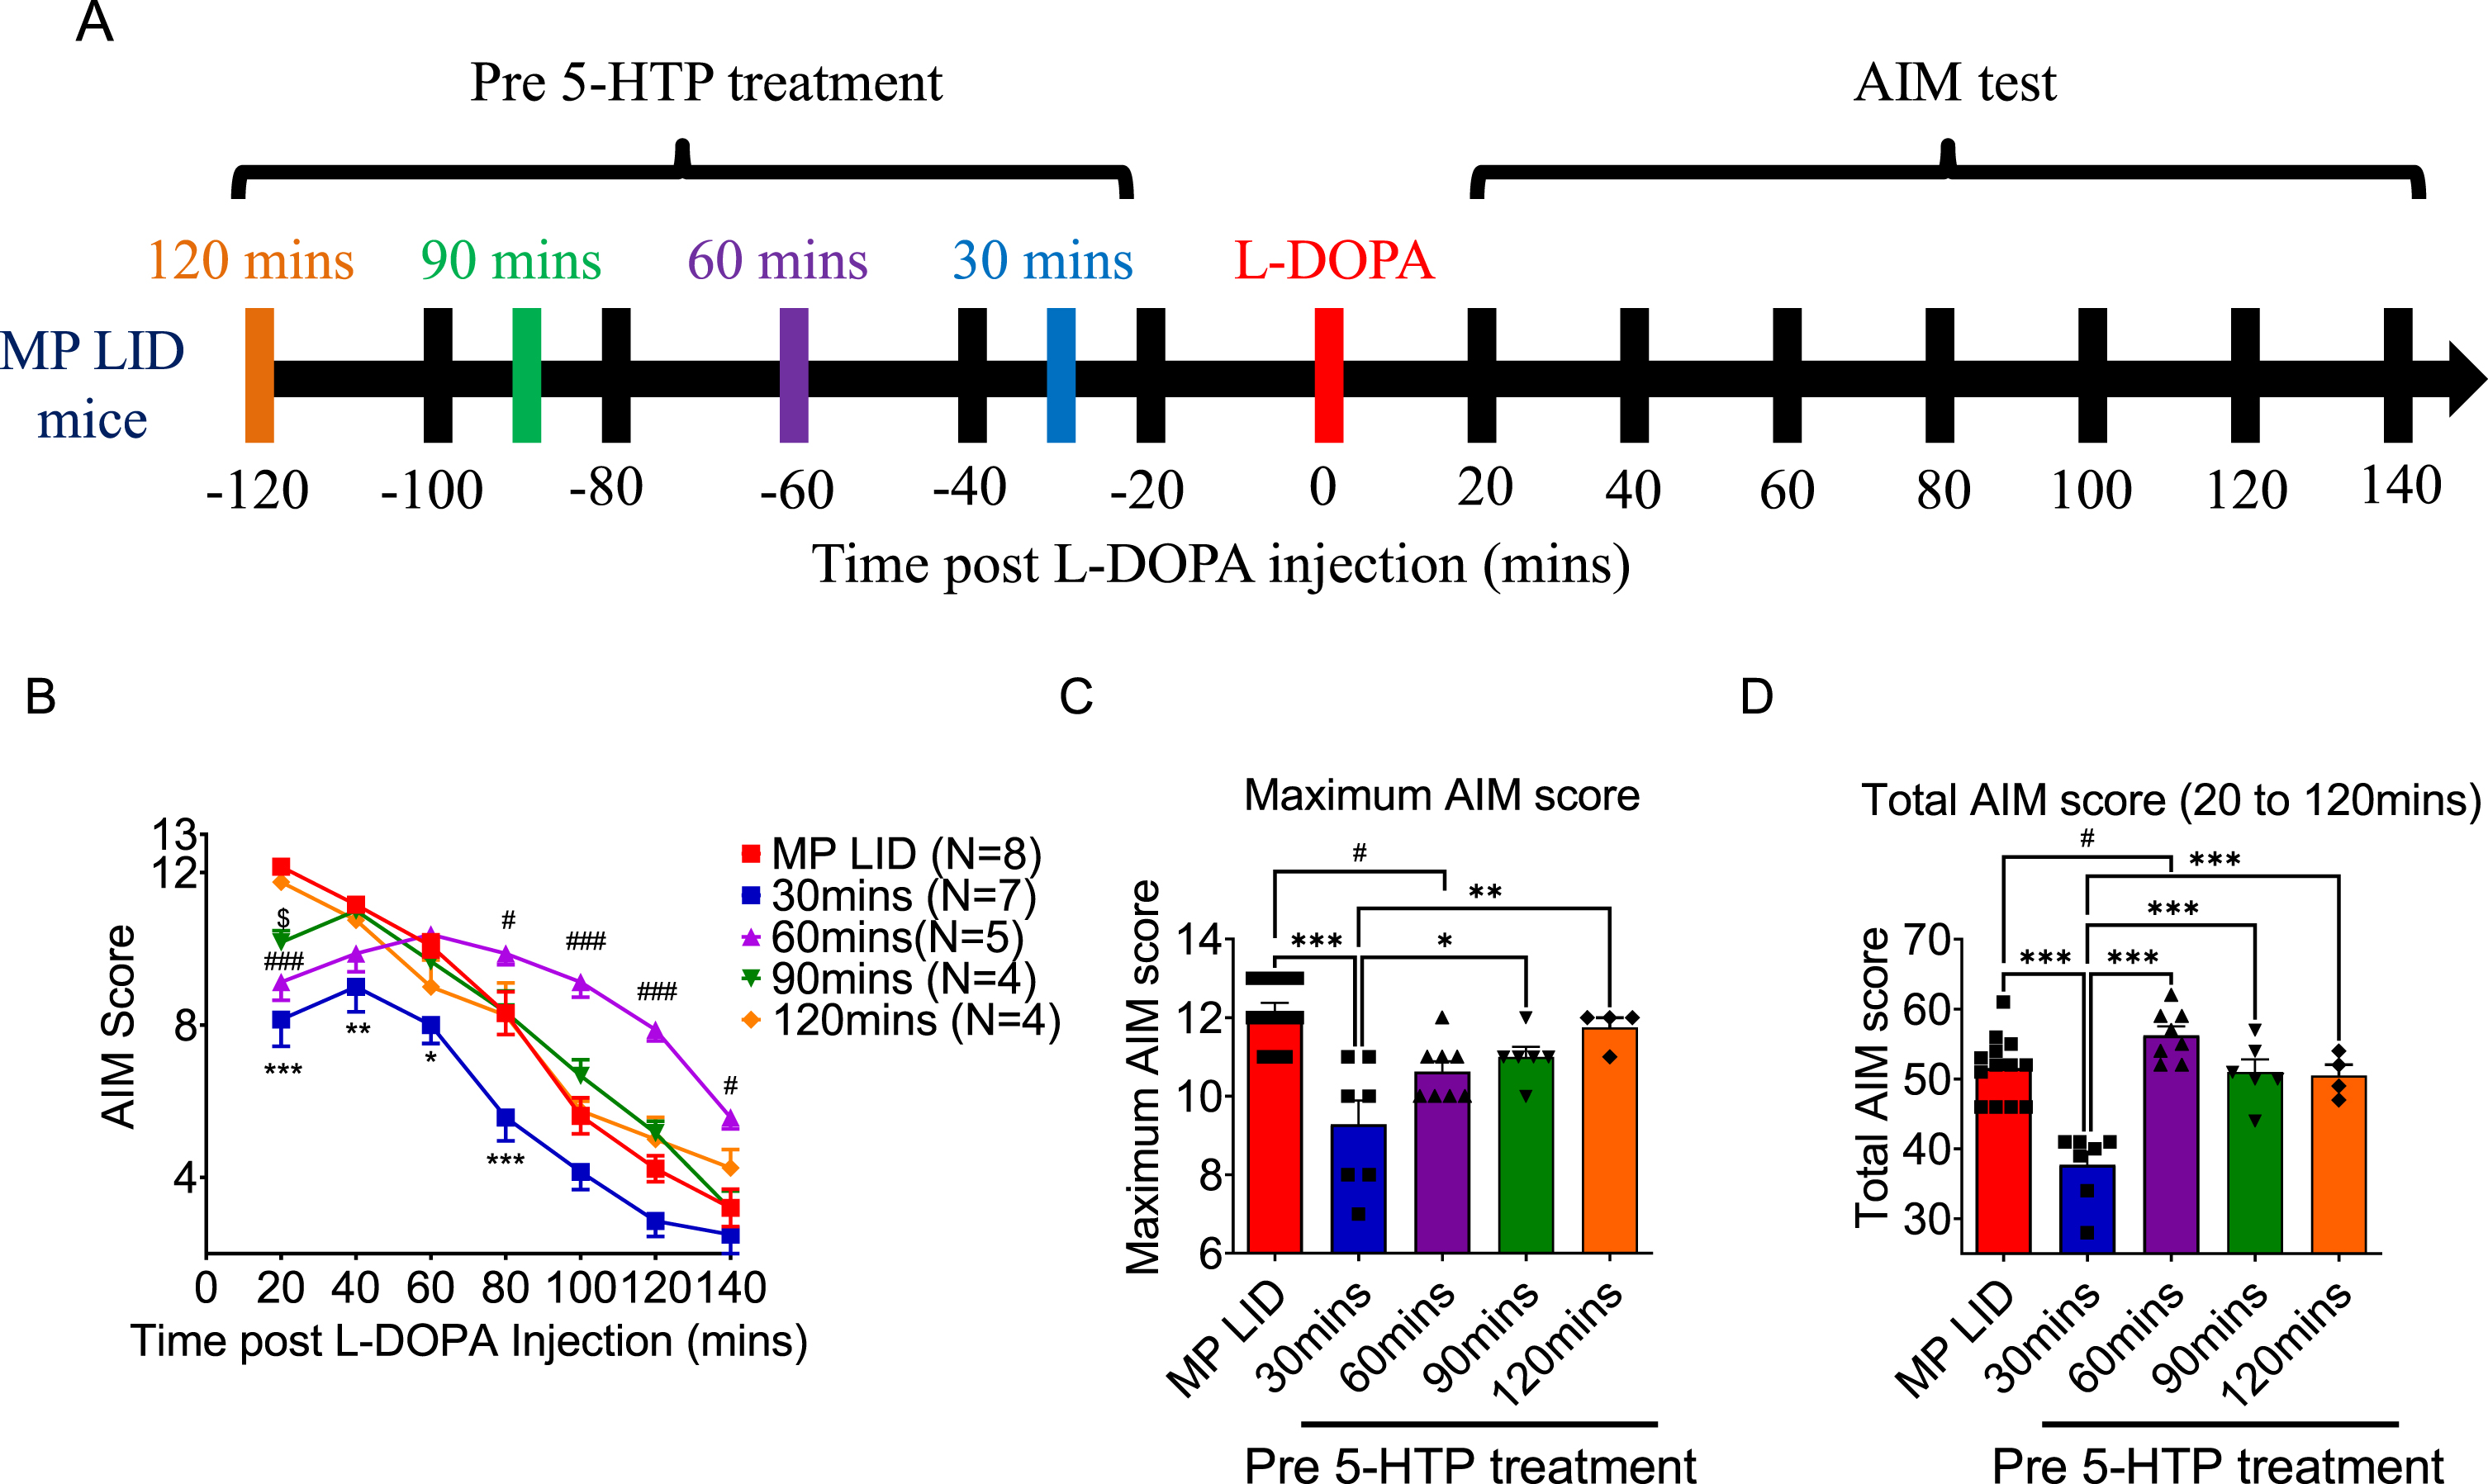 Administering 5-HTP (50 mg/kg) 30 min before L-DOPA (10 mg/kg) treatment was an effective method for mitigating the abnormal AIM scores induced by L-DOPA in L-DOPA-primed MP mice (MP LID mice). A) The influence of pre-treatment with 5-HTP at time intervals of 30, 60, 90, and 120 min before the administration of L-DOPA on the L-DOPA-induced dyskinesia in MP LID mice. B) MP LID mice were pre-administered 5-HTP, followed by the administration of L-DOPA at different time intervals. Following L-DOPA administration, AIM scores were assessed at 20-min intervals, with a total of seven evaluations. Two-way ANOVA followed by a Bonferroni post hoc test for multiple comparisons. At 30 min compared to baseline, *p < 0.05, ***p < 0.001; at 60 min compared to baseline, ##p < 0.01, ###p < 0.001. Observation of the seven scores separately across the time span of 20 to 140 min post-L-DOPA administration, (C) the maximum AIM score from the seven scores (maximum AIM score), and (D) the sum of the seven scores (total AIM score). The maximum AIM score and the total AIM score were both lower when L-DOPA was administered 30 min after pre-treatment with 5-HTP (represented by the blue bar/rectangular symbol; 30 min), as compared to the other pre-treatment 5-HTP groups and the group without 5-HTP pre-treatment (represented by the red bar/rectangular symbol; Baseline). In particular, the administration of L-DOPA 60 min after pre-treatment with 5-HTP (represented by the purple bar/triangle symbol; 60 min) resulted in an elevation in the total AIM score compared to the group without 5-HTP pre-treatment (Baseline vs. 60 min, p < 0.01). One-way ANOVA followed by a Bonferroni post hoc test for multiple comparisons. At 30 min compared to the other group, *p < 0.05, **p < 0.01, ***p < 0.001; at 60 min compared to Baseline, ##p < 0.01.